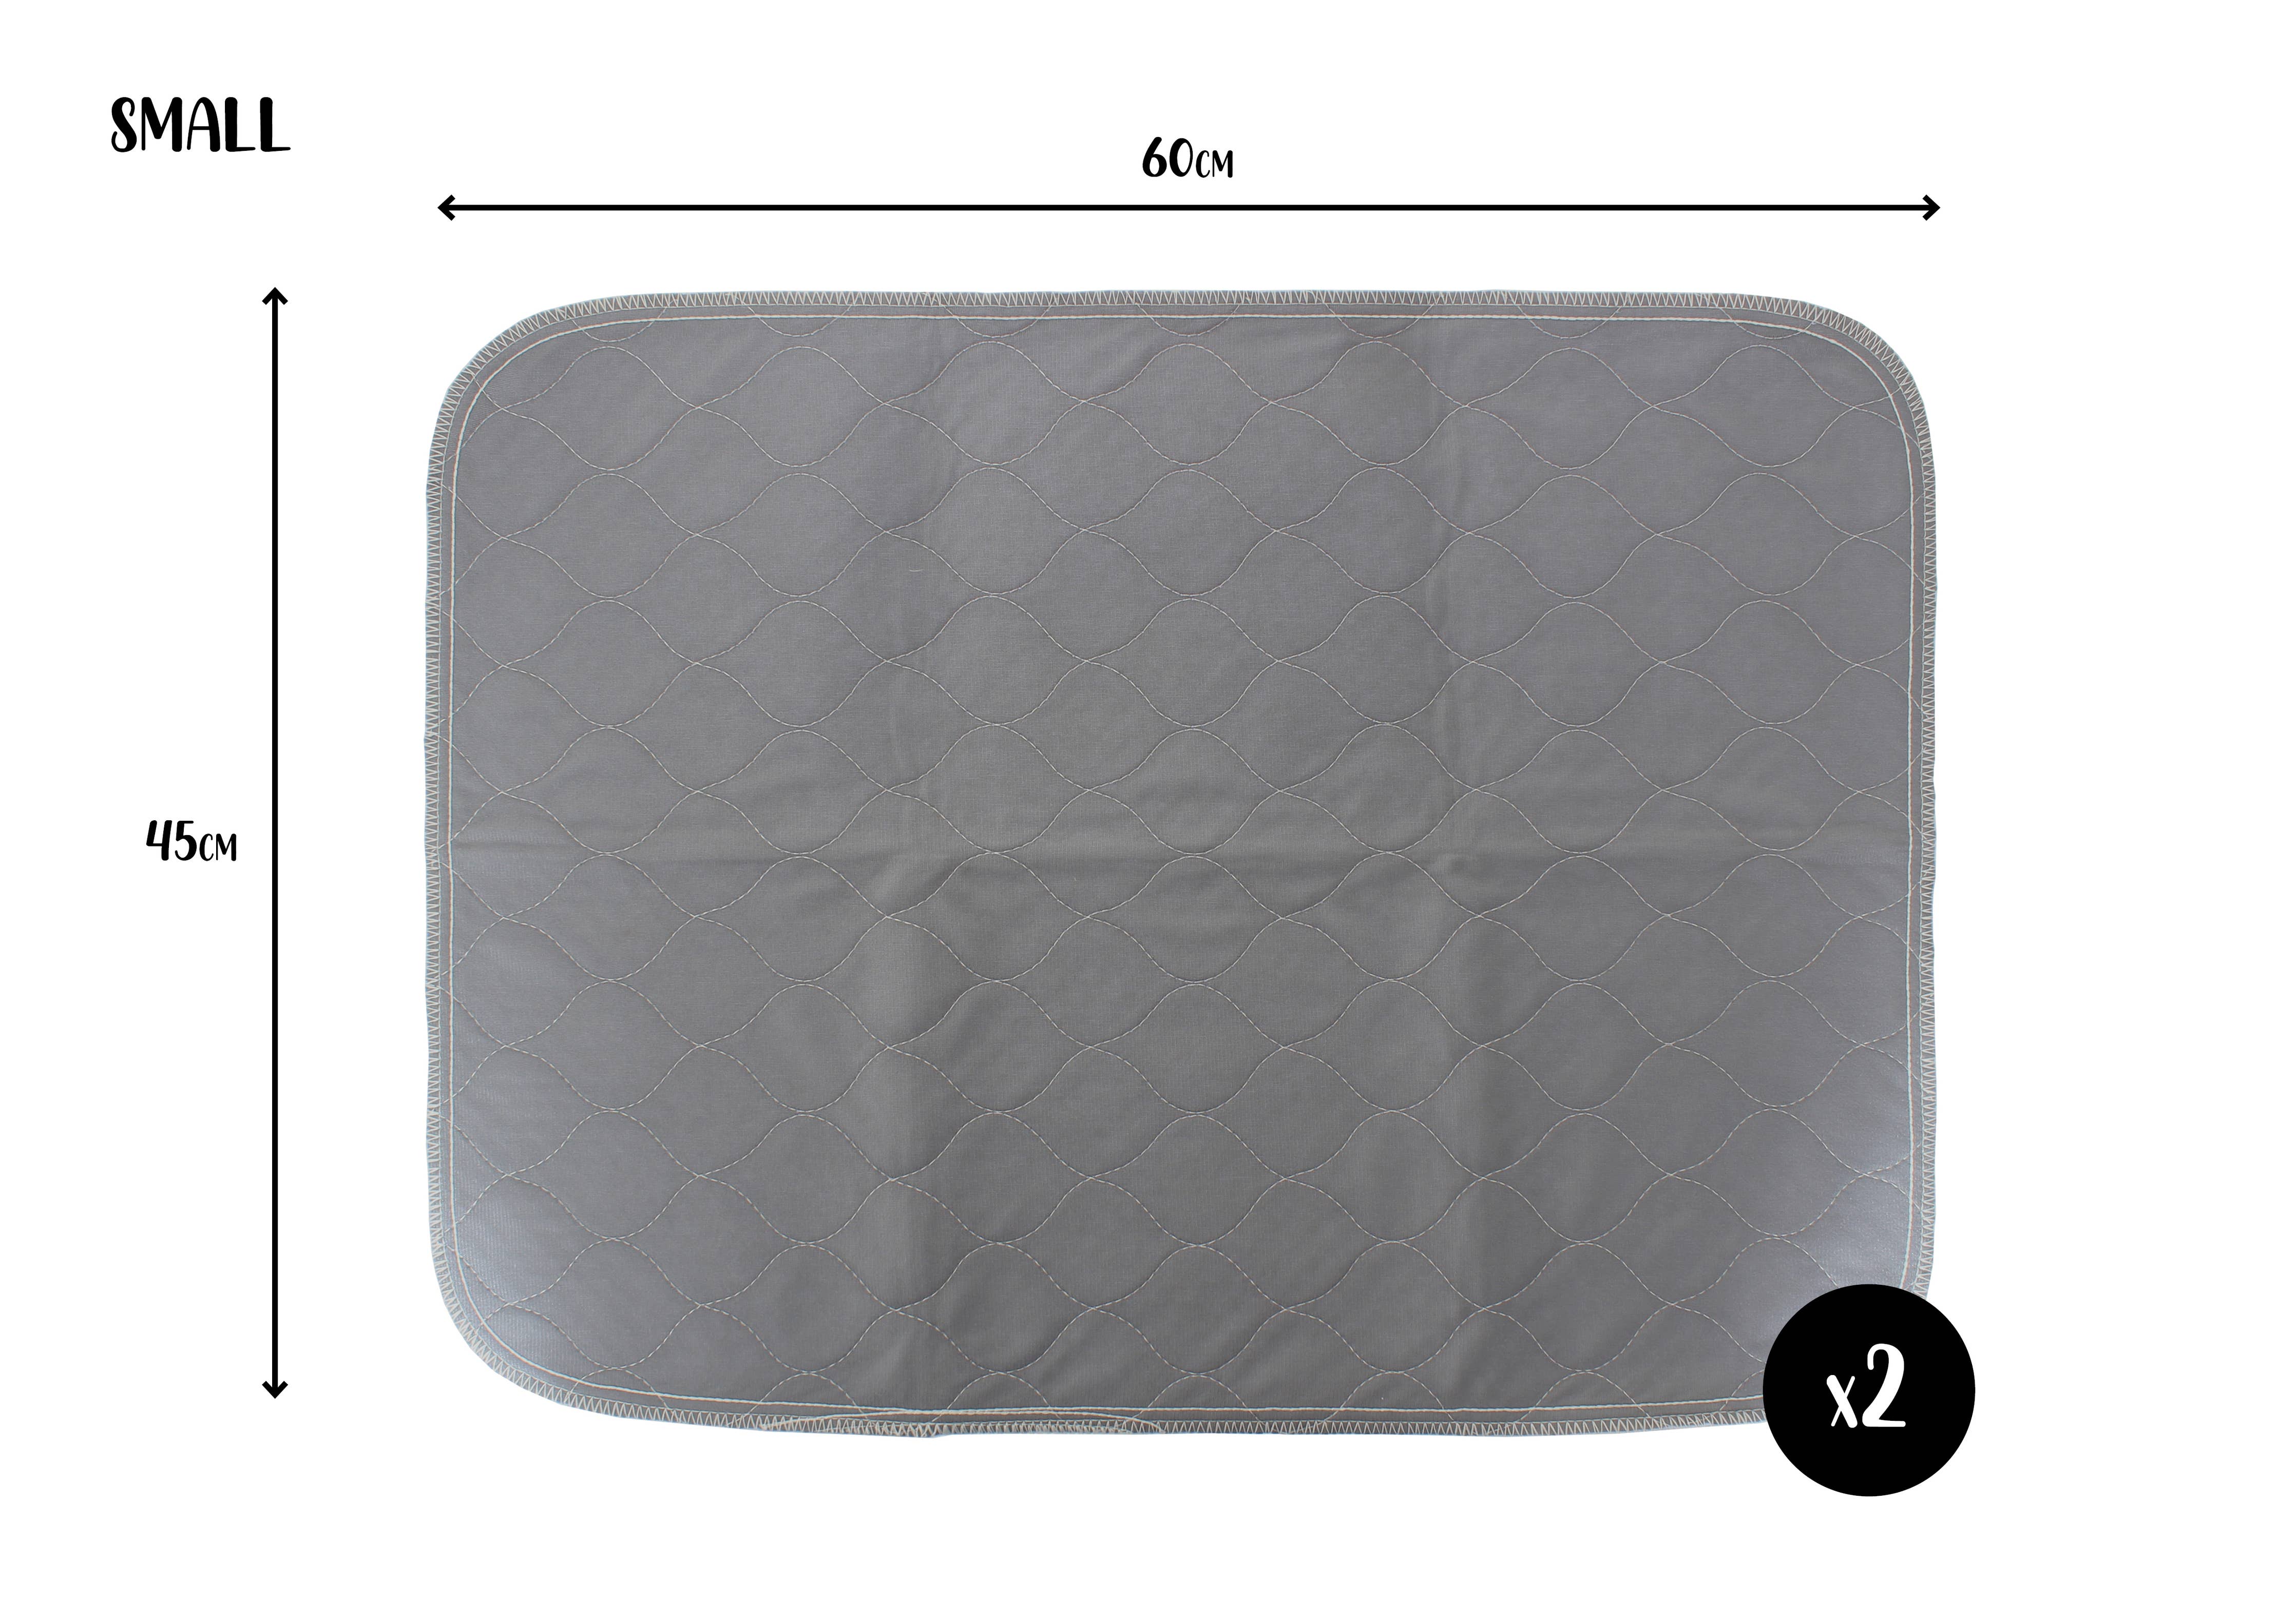 Two Pack of Reusable, Washable, Pet Pads in Grey